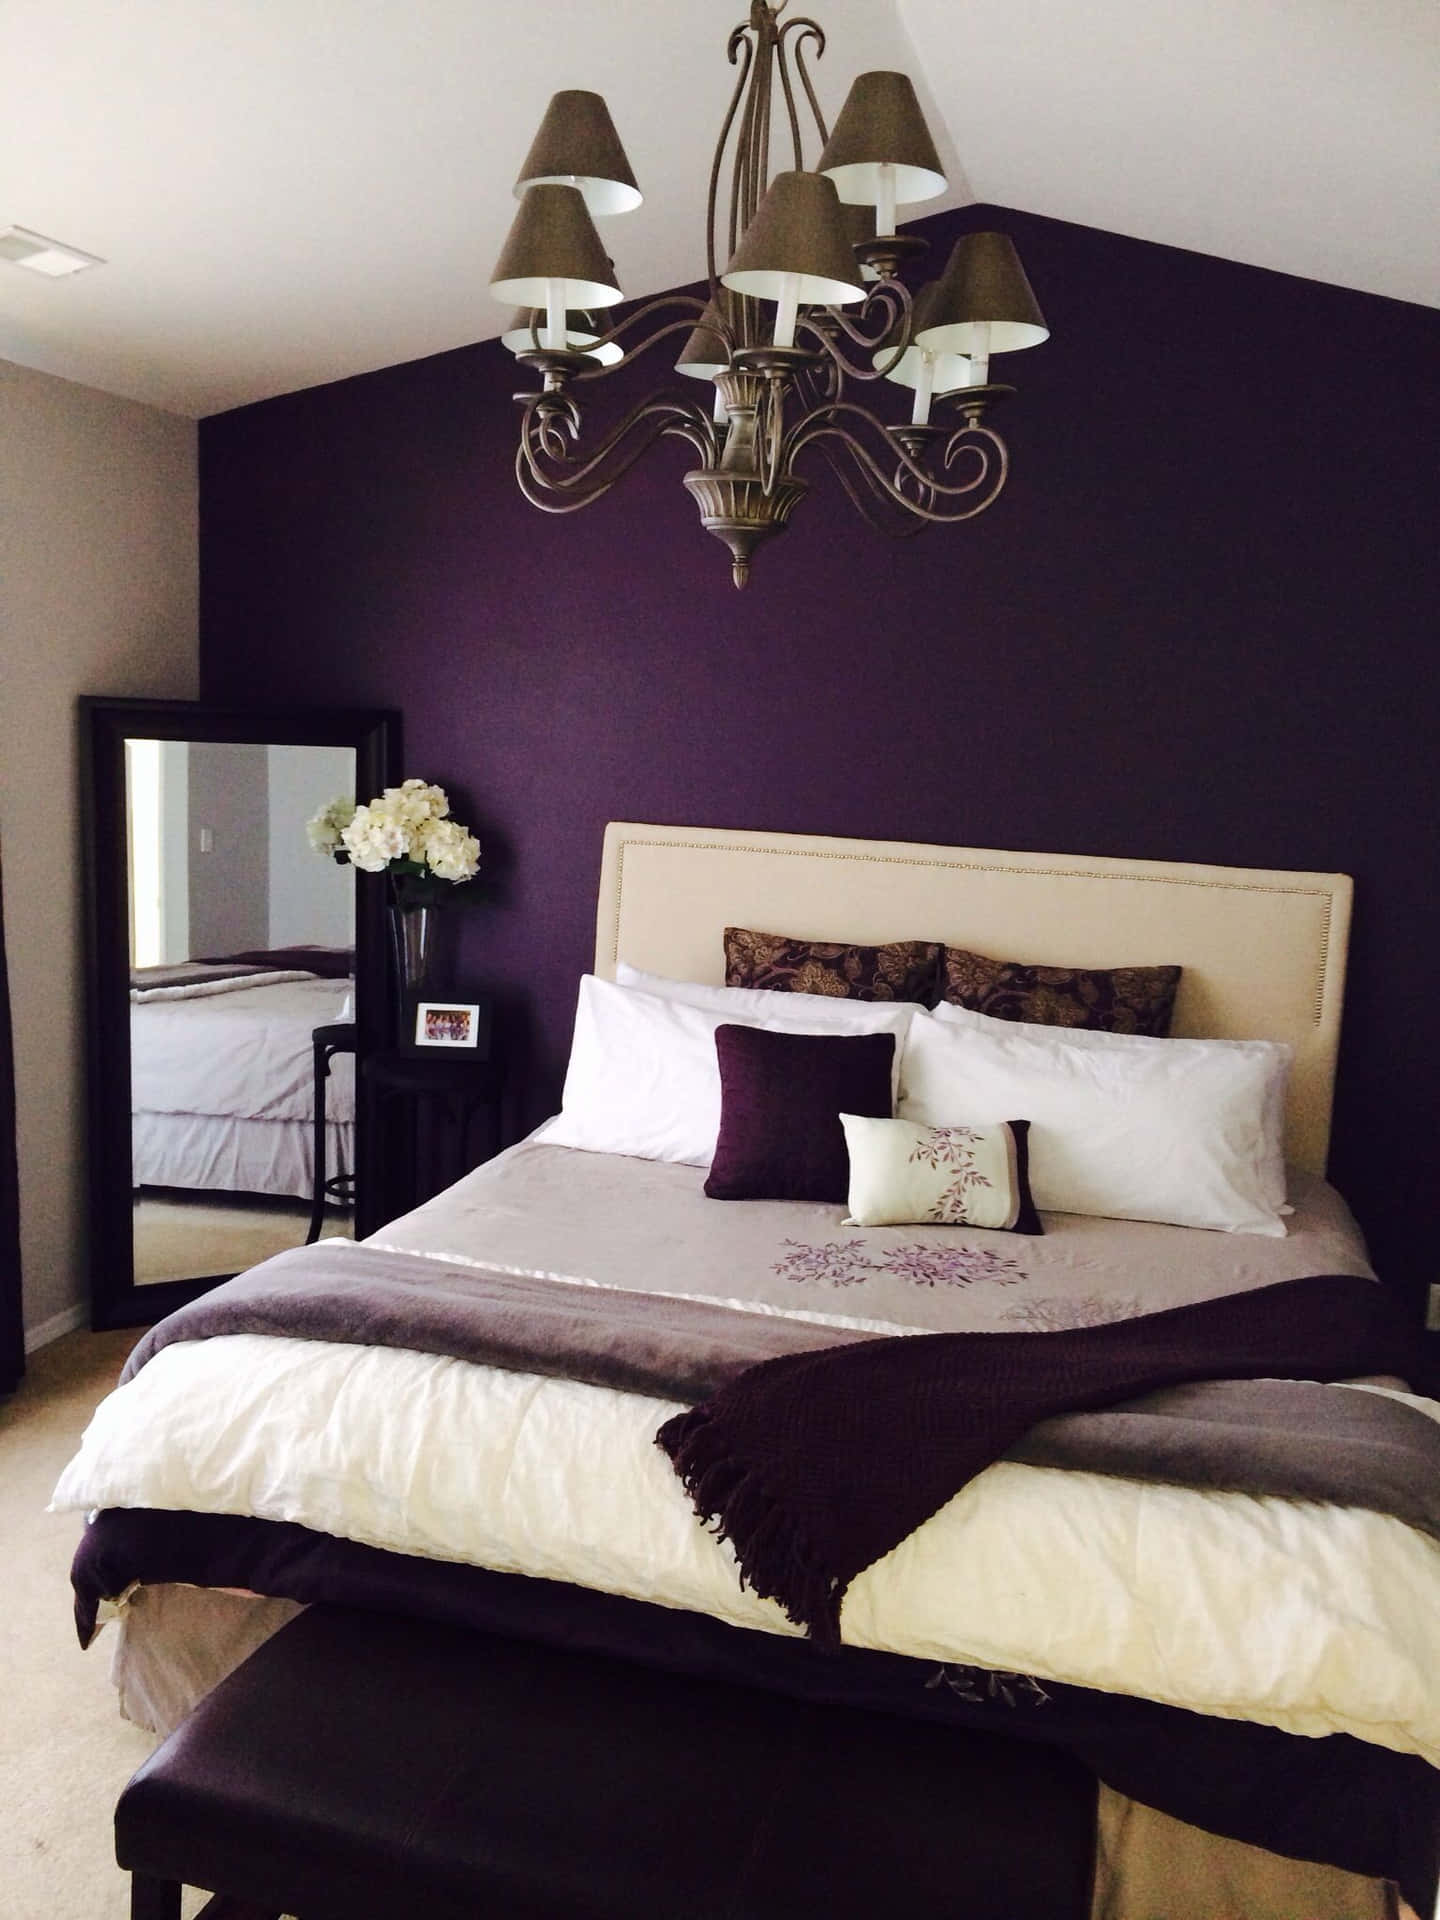 Create a luxurious look with these gorgeous pieces of velvet purple decor. Wallpaper